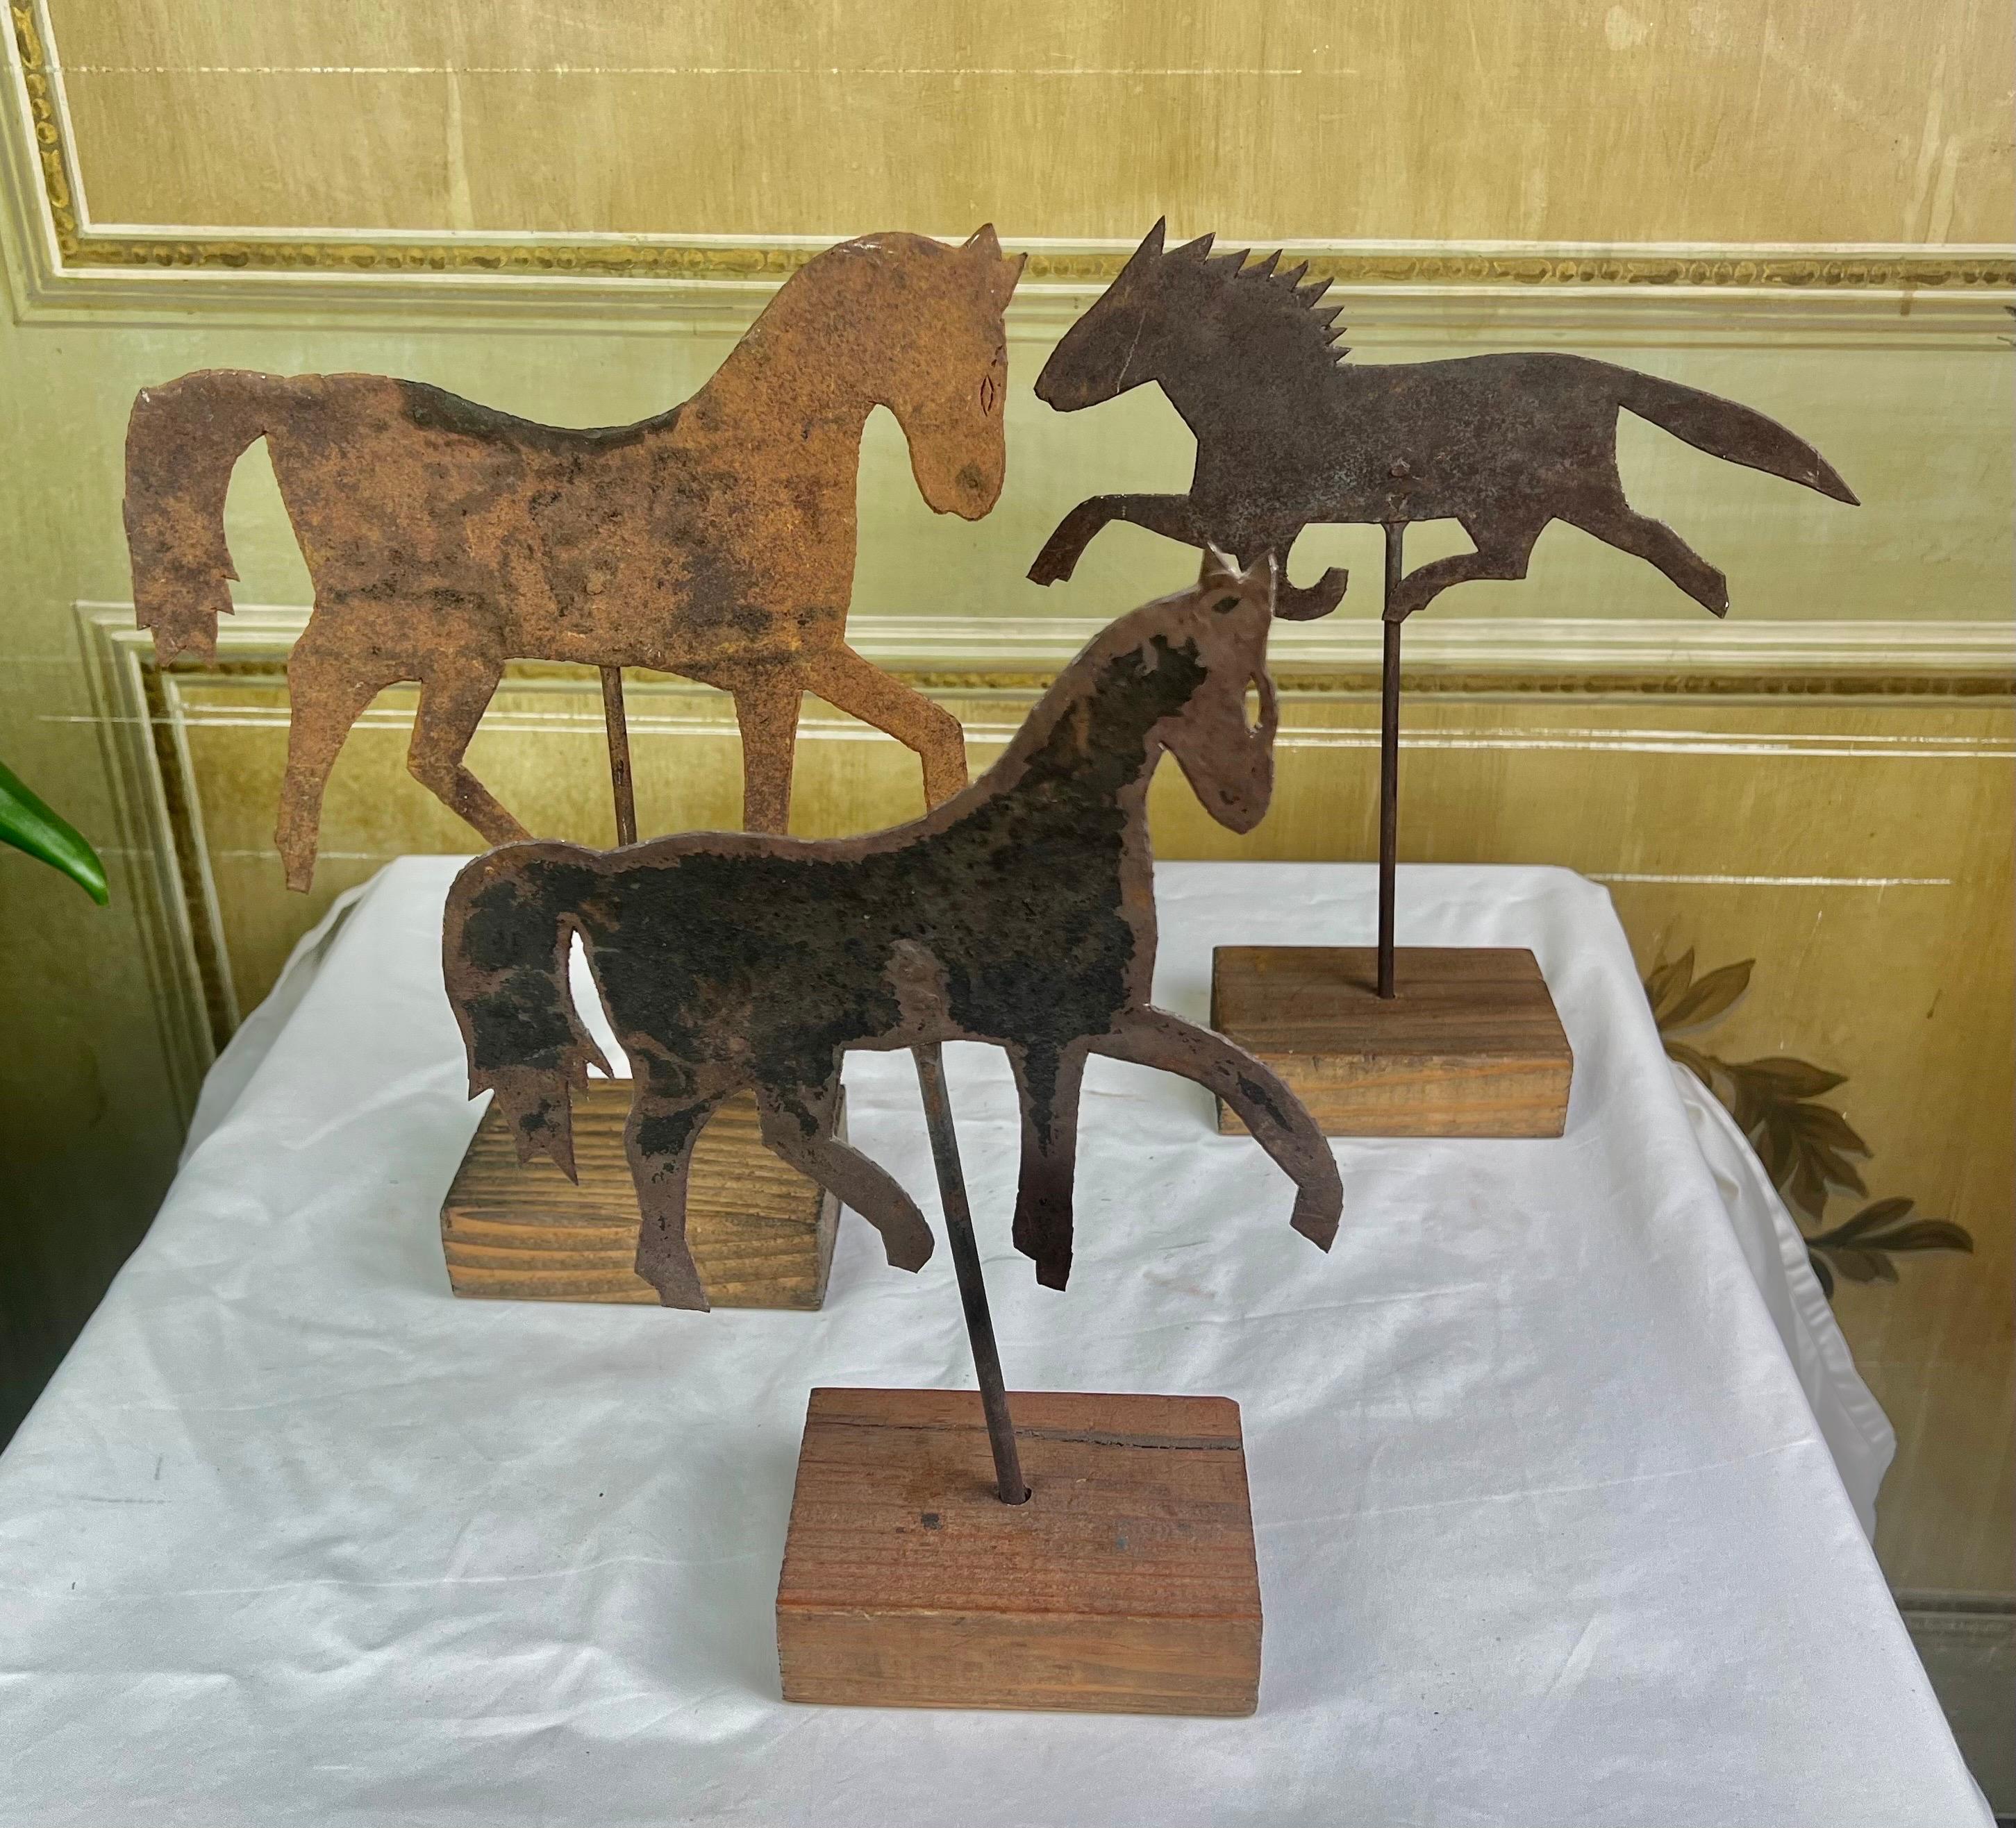 Set of three metal horses mounted on wood bases. These charming horses came out of the same collection.

Sizes:
1) 13.5